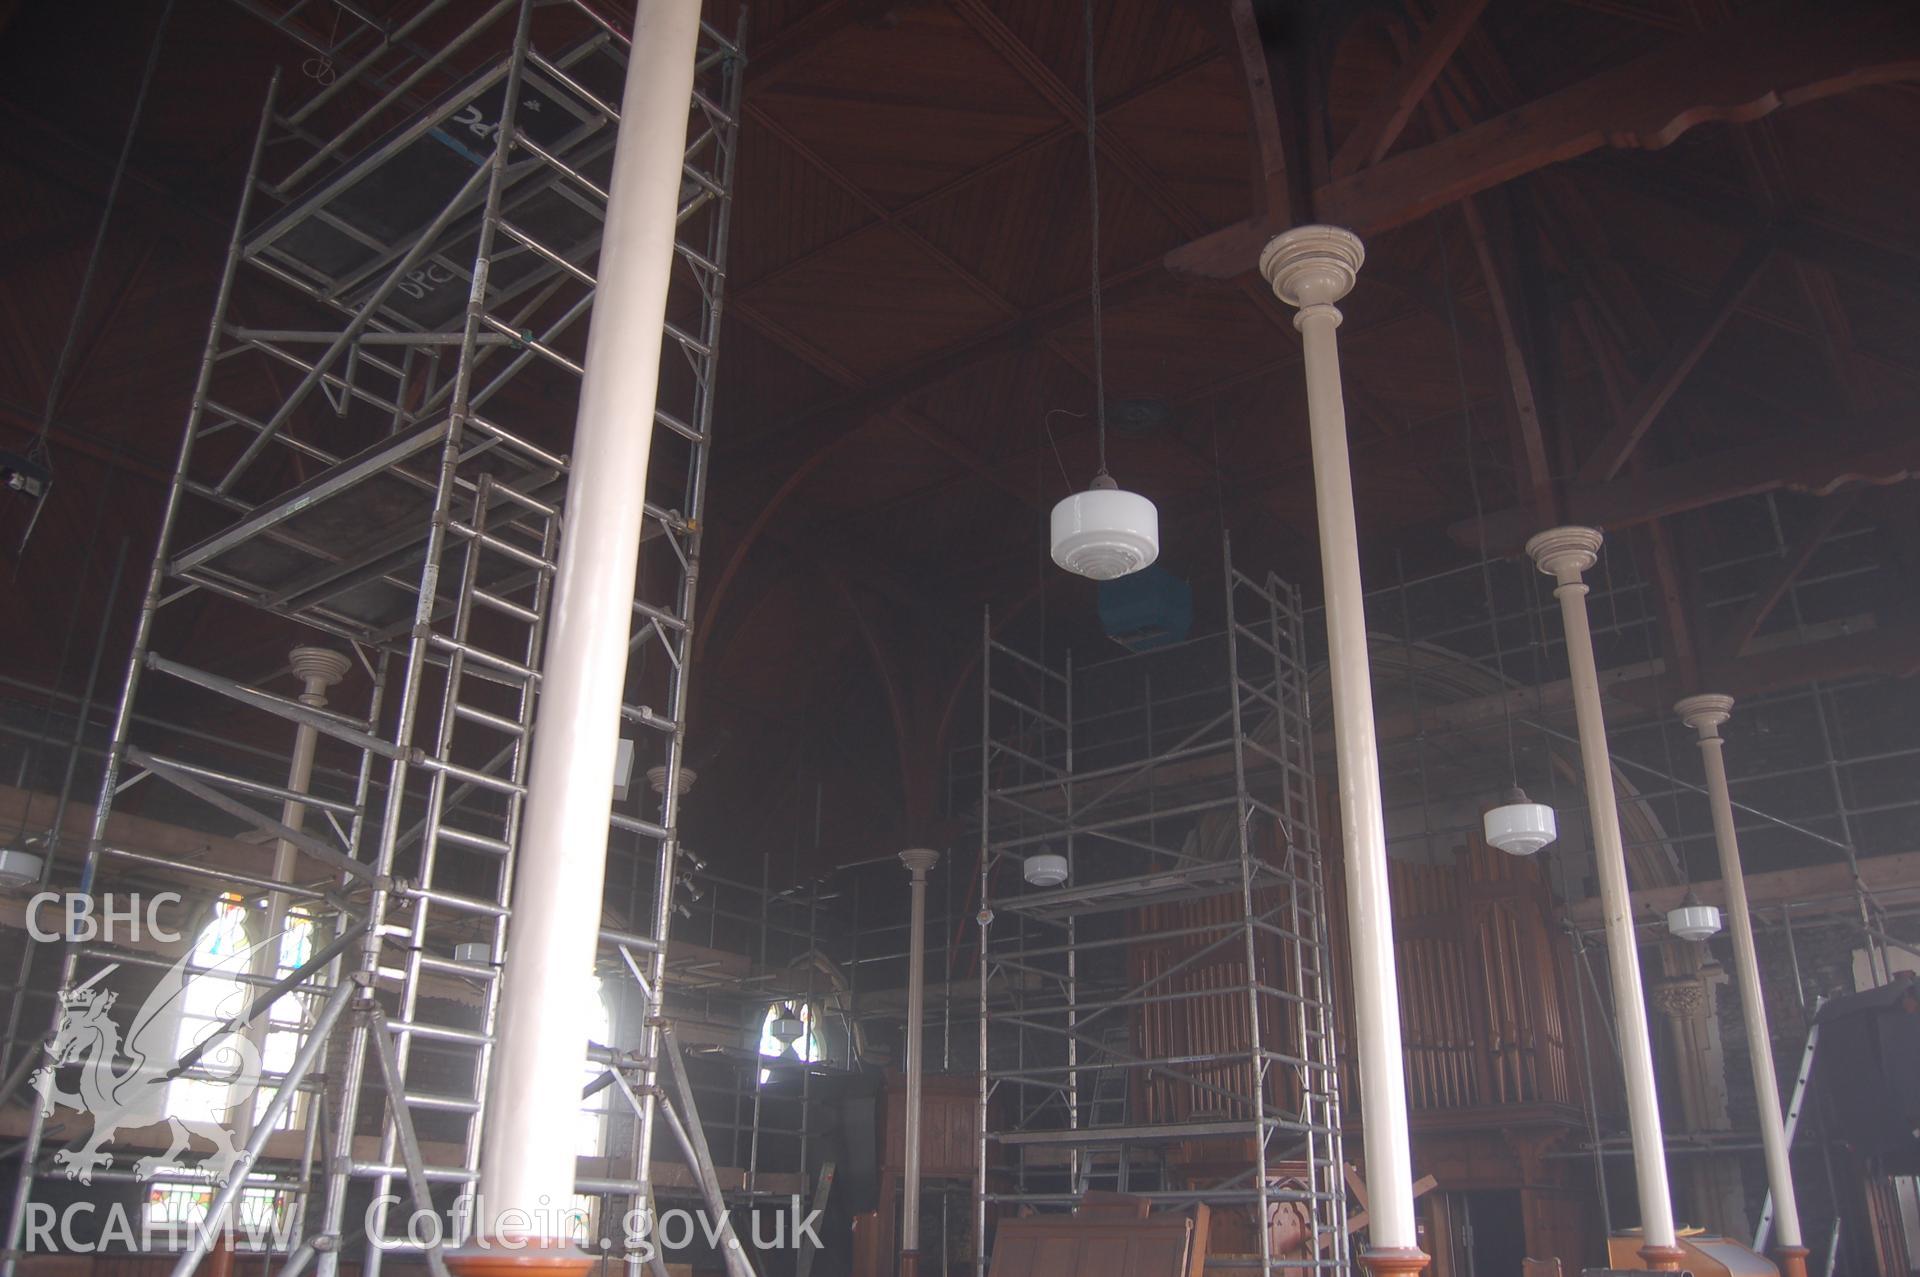 Digital colour photograph showing interior renovation work (scaffolding) during the second phase of restoration (2009-2010) of Van Road United Reformed Church.